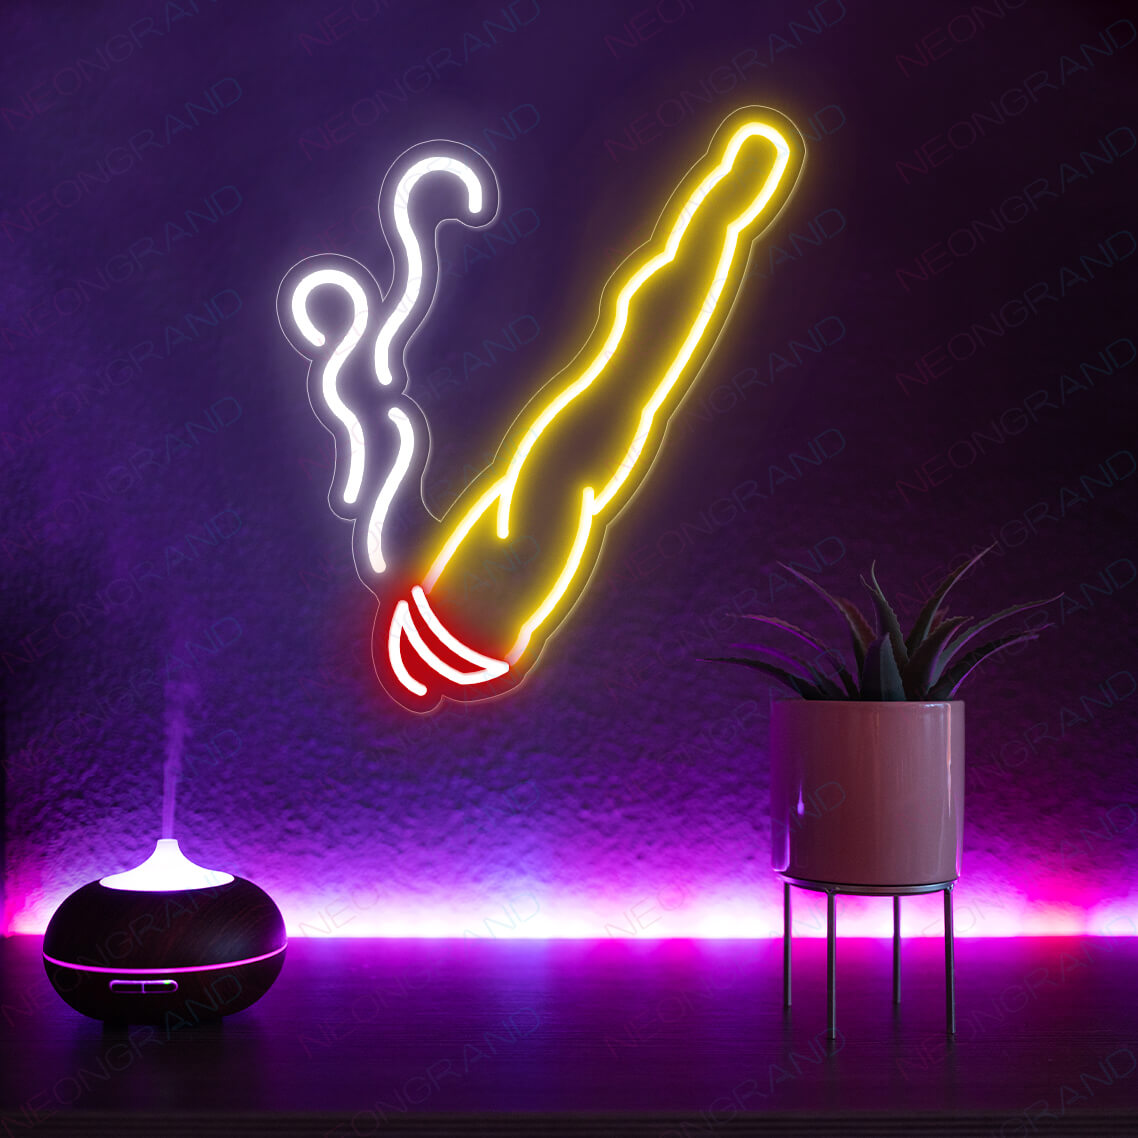 Neon Sign Smoking Weed Neon Sign Led Light - NeonGrand